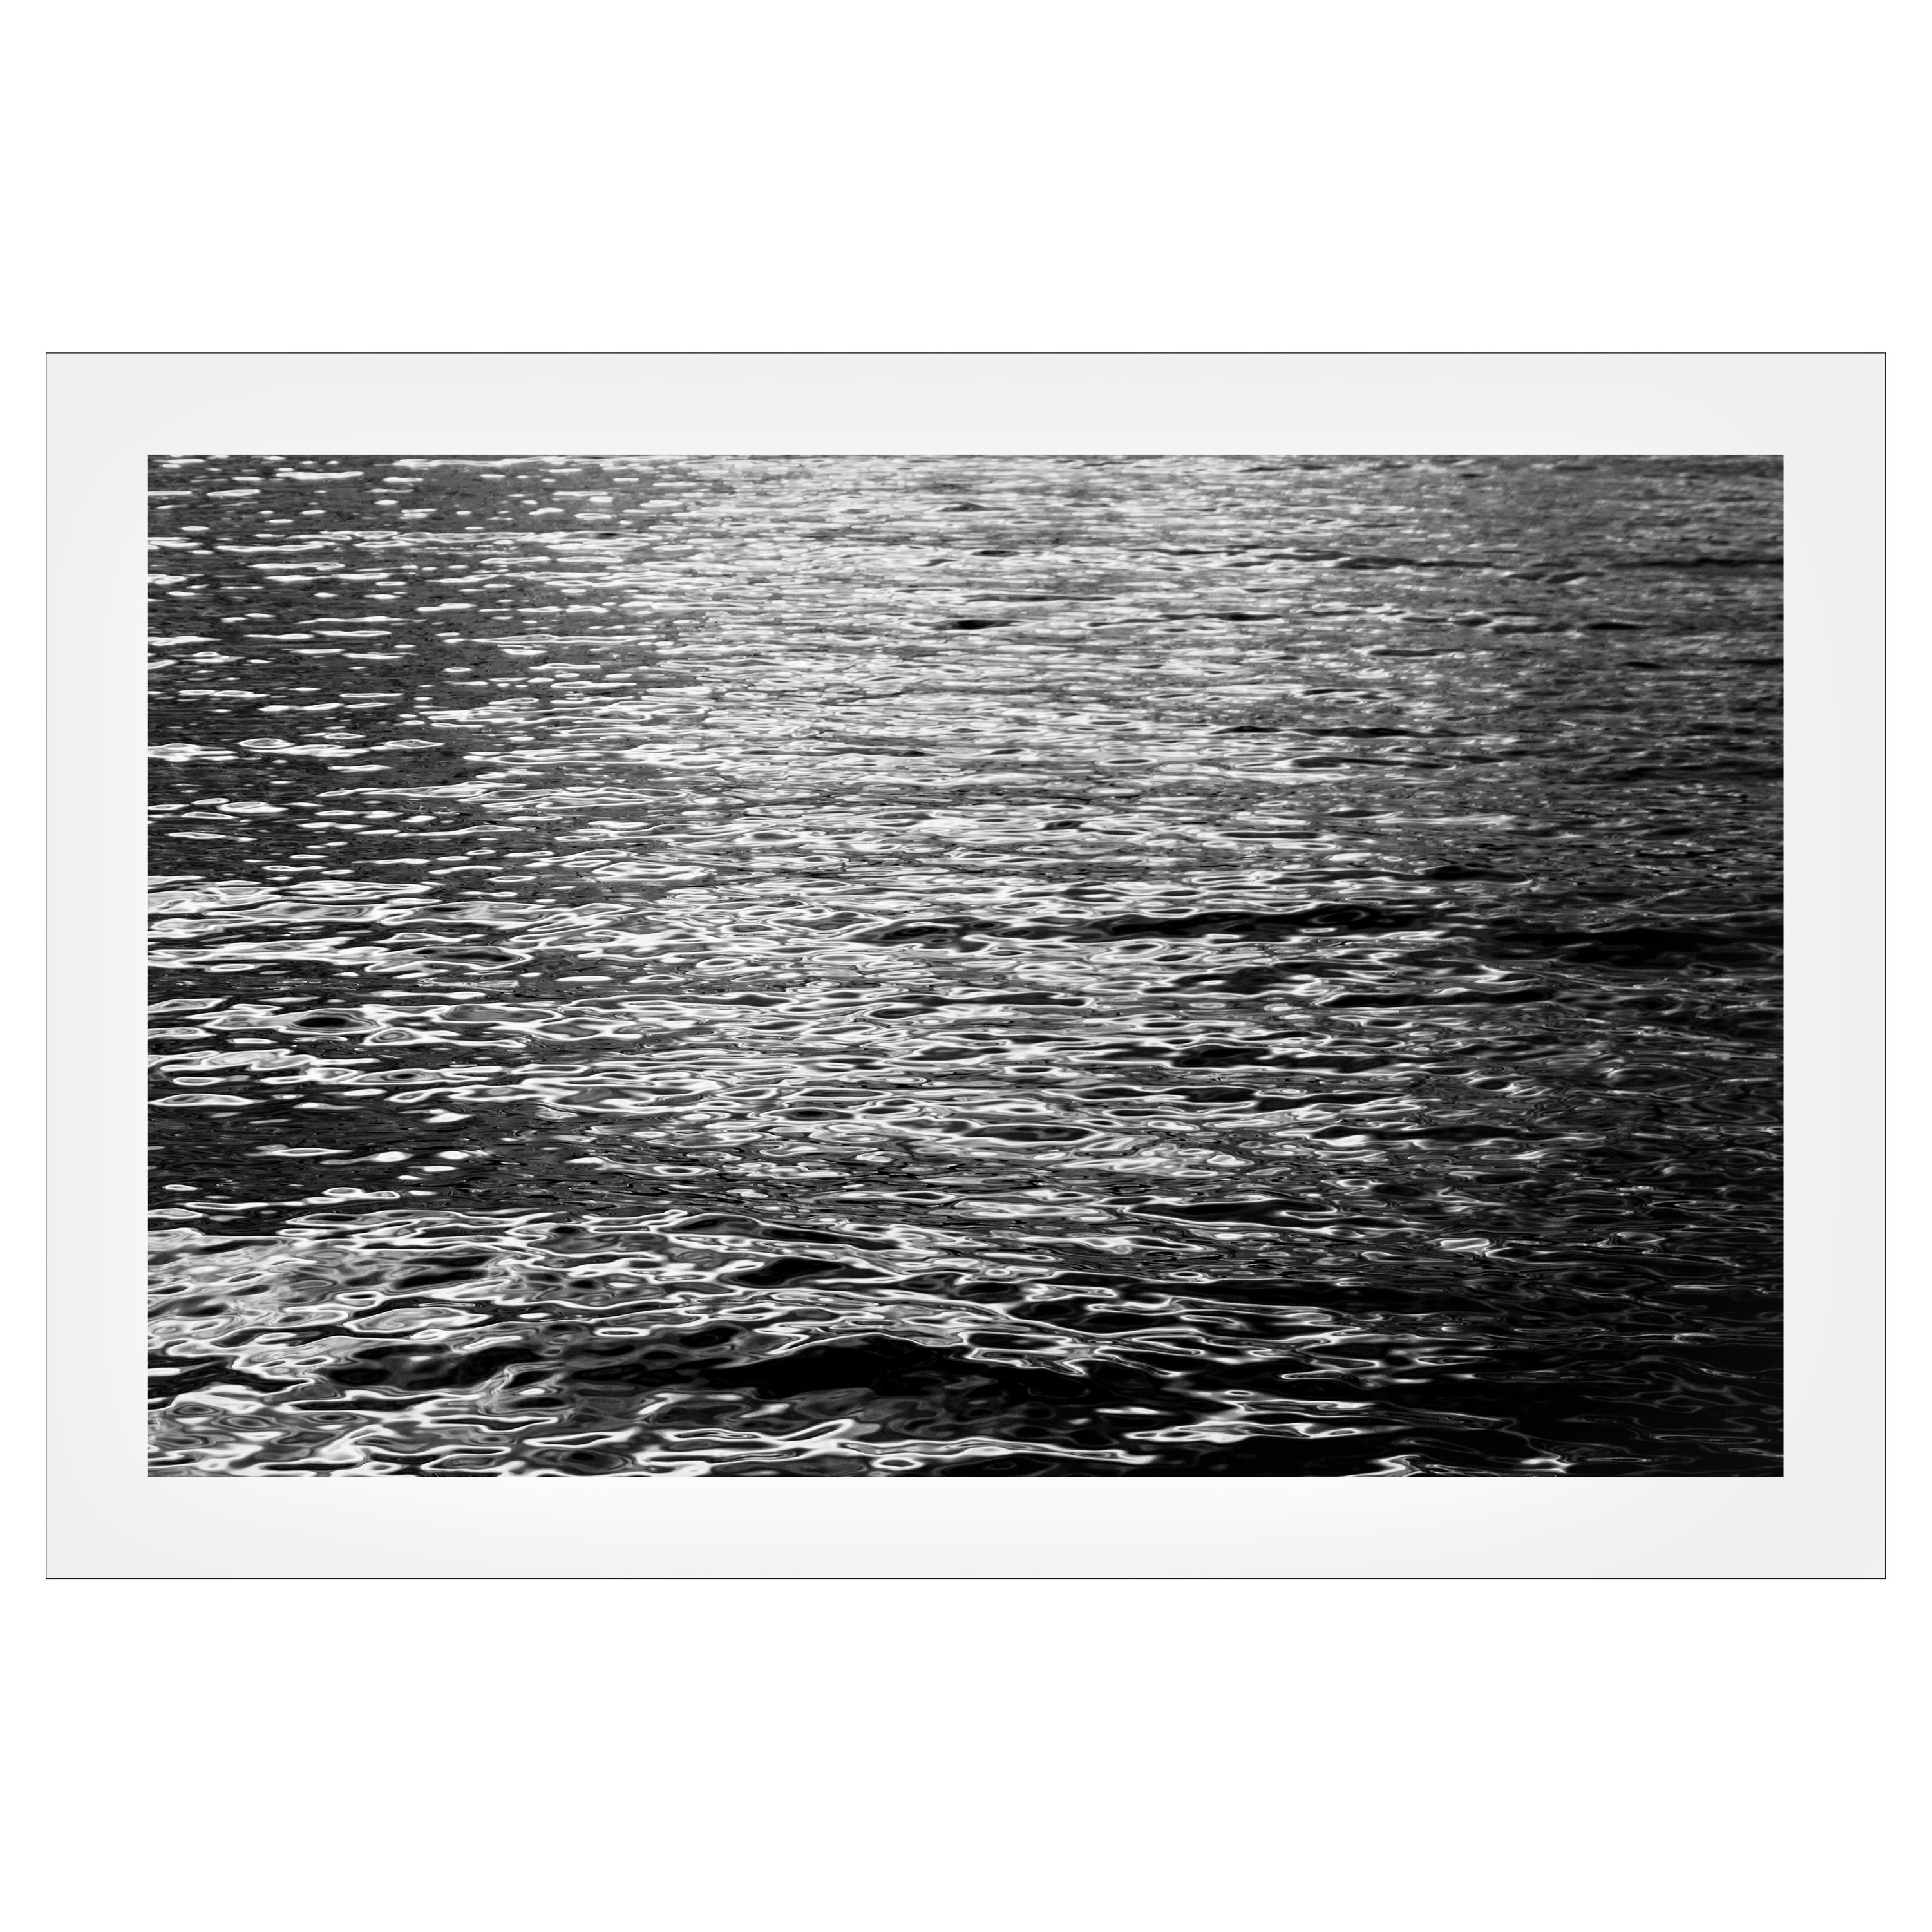 Kind of Cyan Black and White Photograph - Black and White Abstract Ripples Under Moonlight, Nocturnal Nautical Giclée